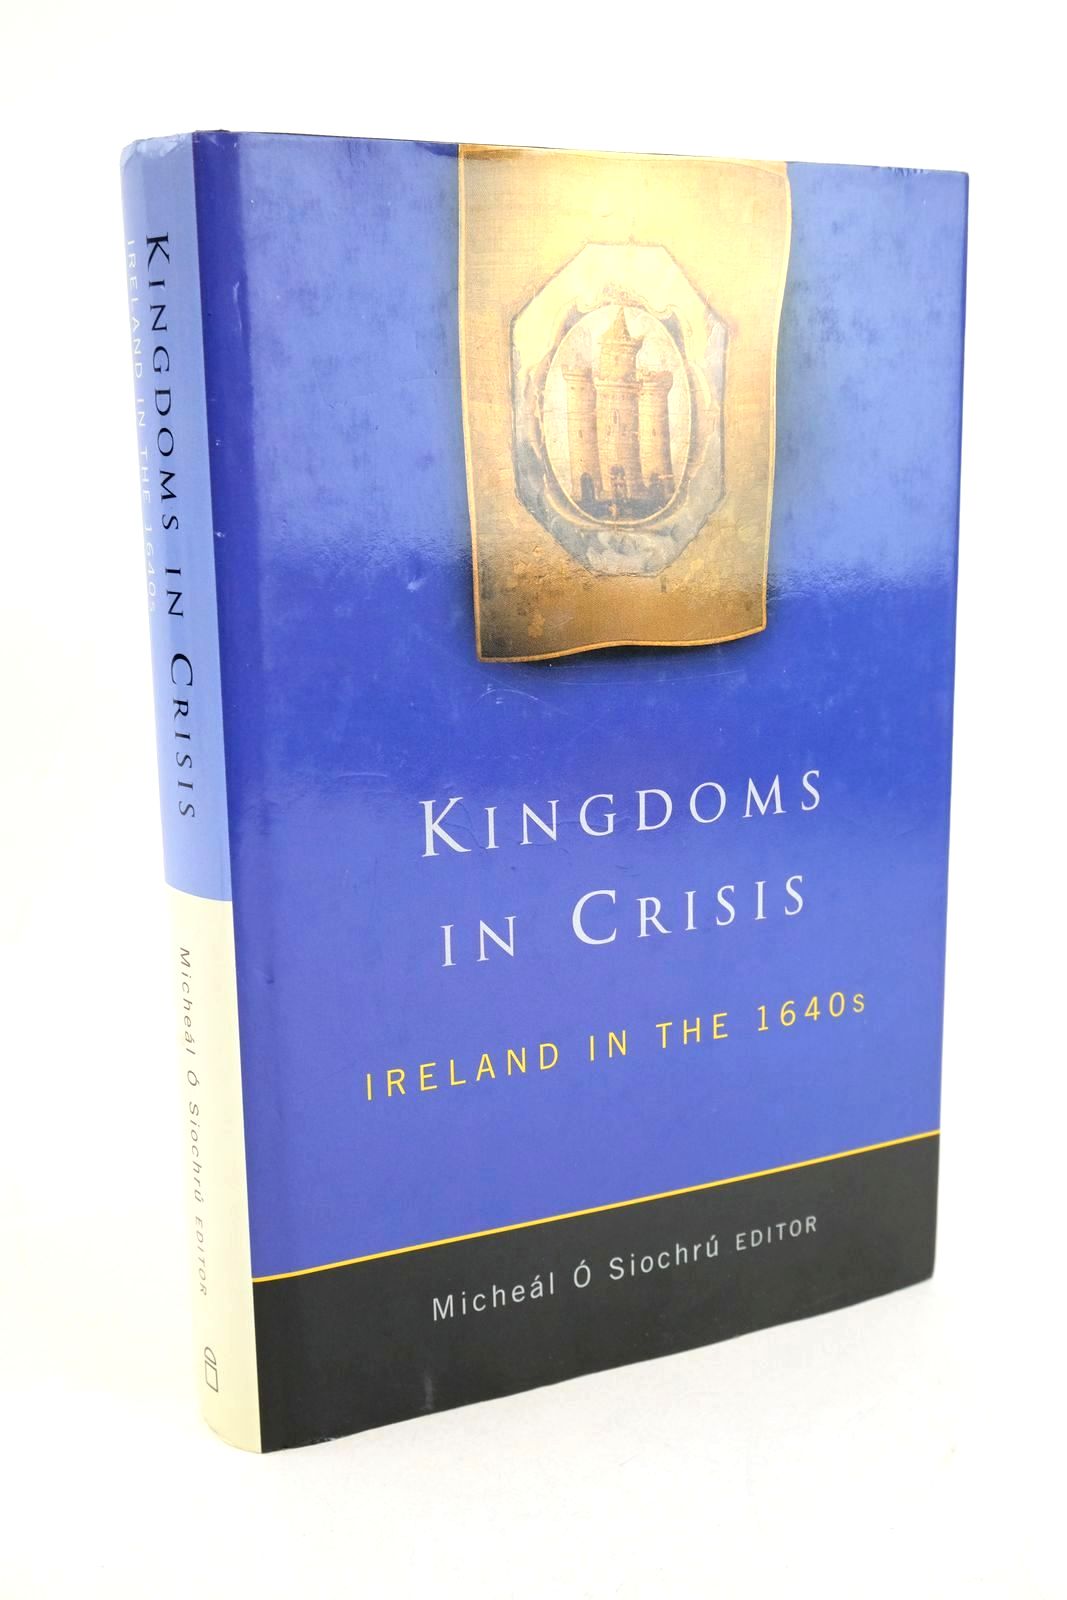 Photo of KINGDOMS IN CRISIS: IRELAND IN THE 1940S written by Siochru, Micheal O. published by Four Courts Press (STOCK CODE: 1327427)  for sale by Stella & Rose's Books